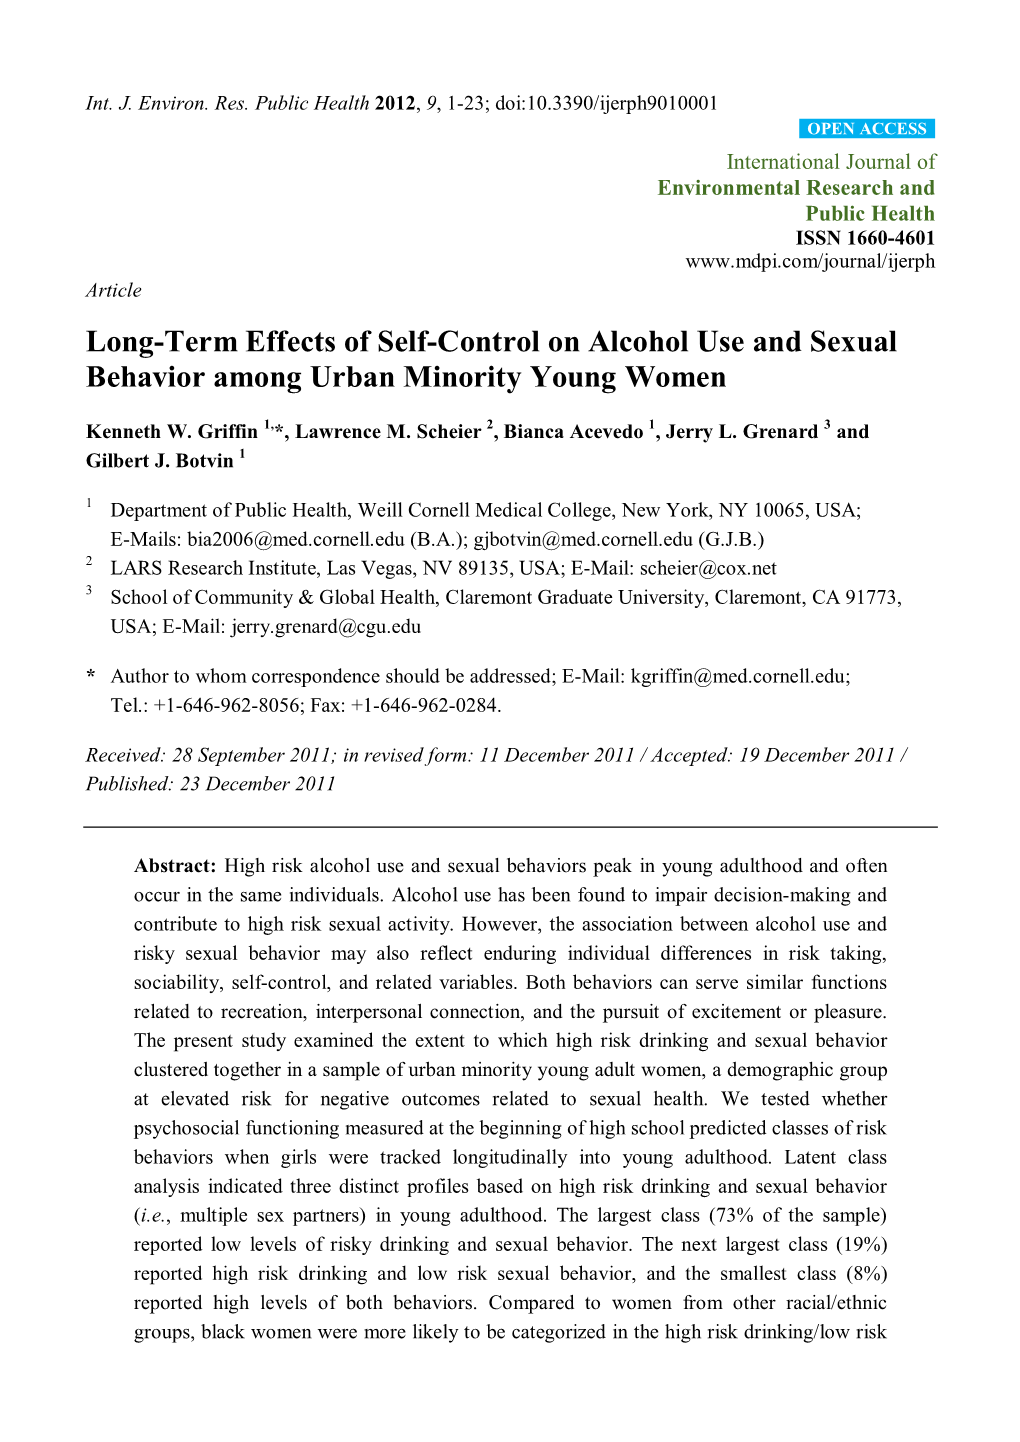 Long-Term Effects of Self-Control on Alcohol Use and Sexual Behavior Among Urban Minority Young Women